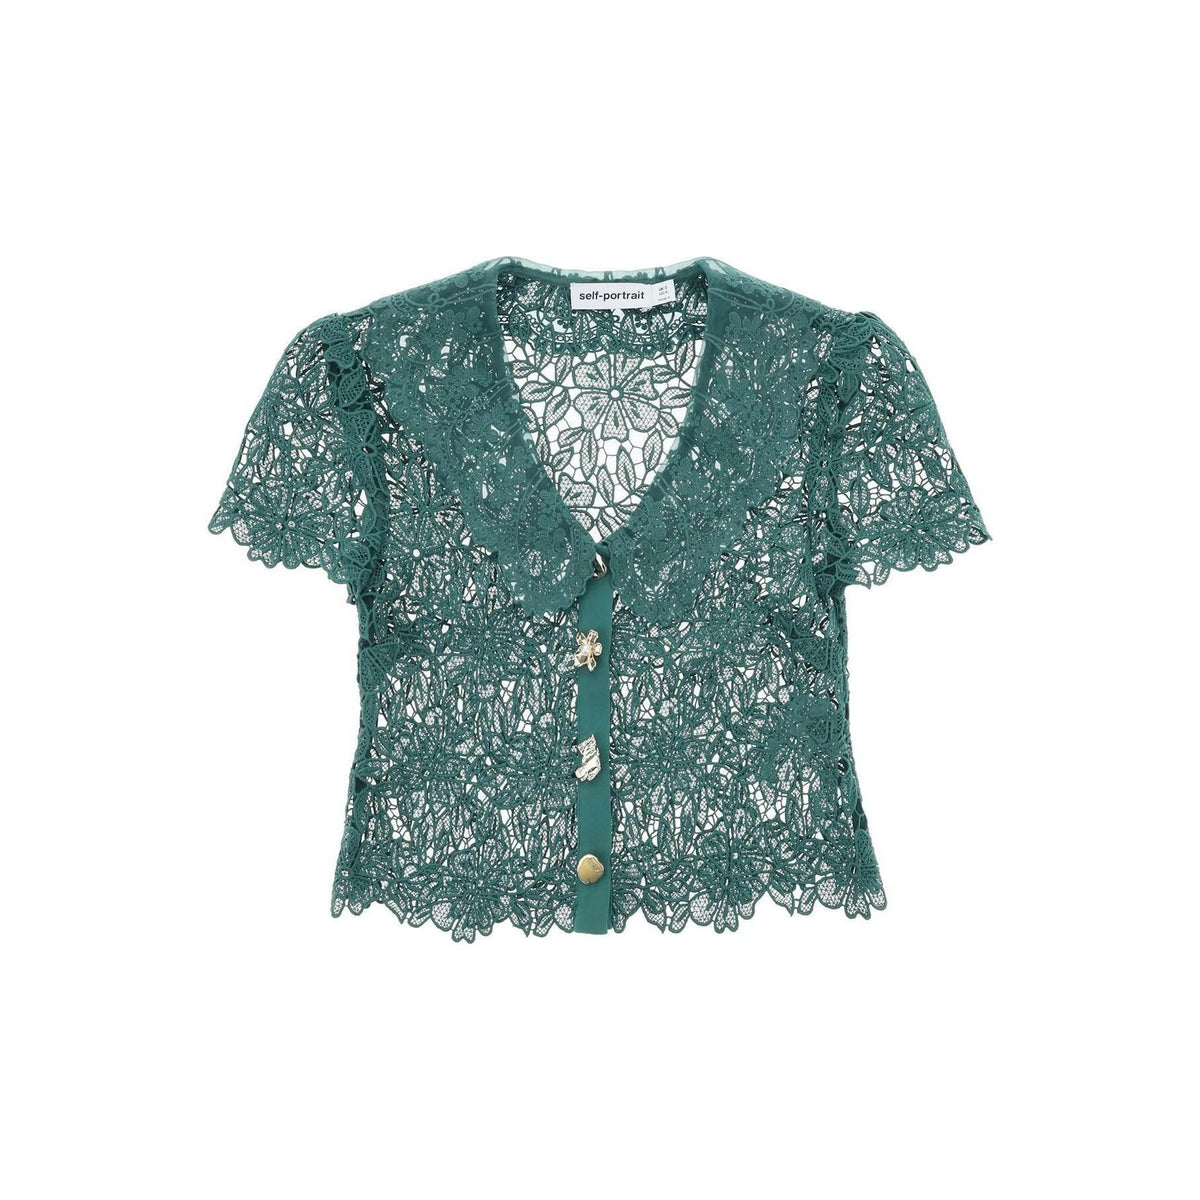 SELF PORTRAIT - Green Floral Guipure Lace Top With Chelsea Collar And Jewel Buttons - JOHN JULIA